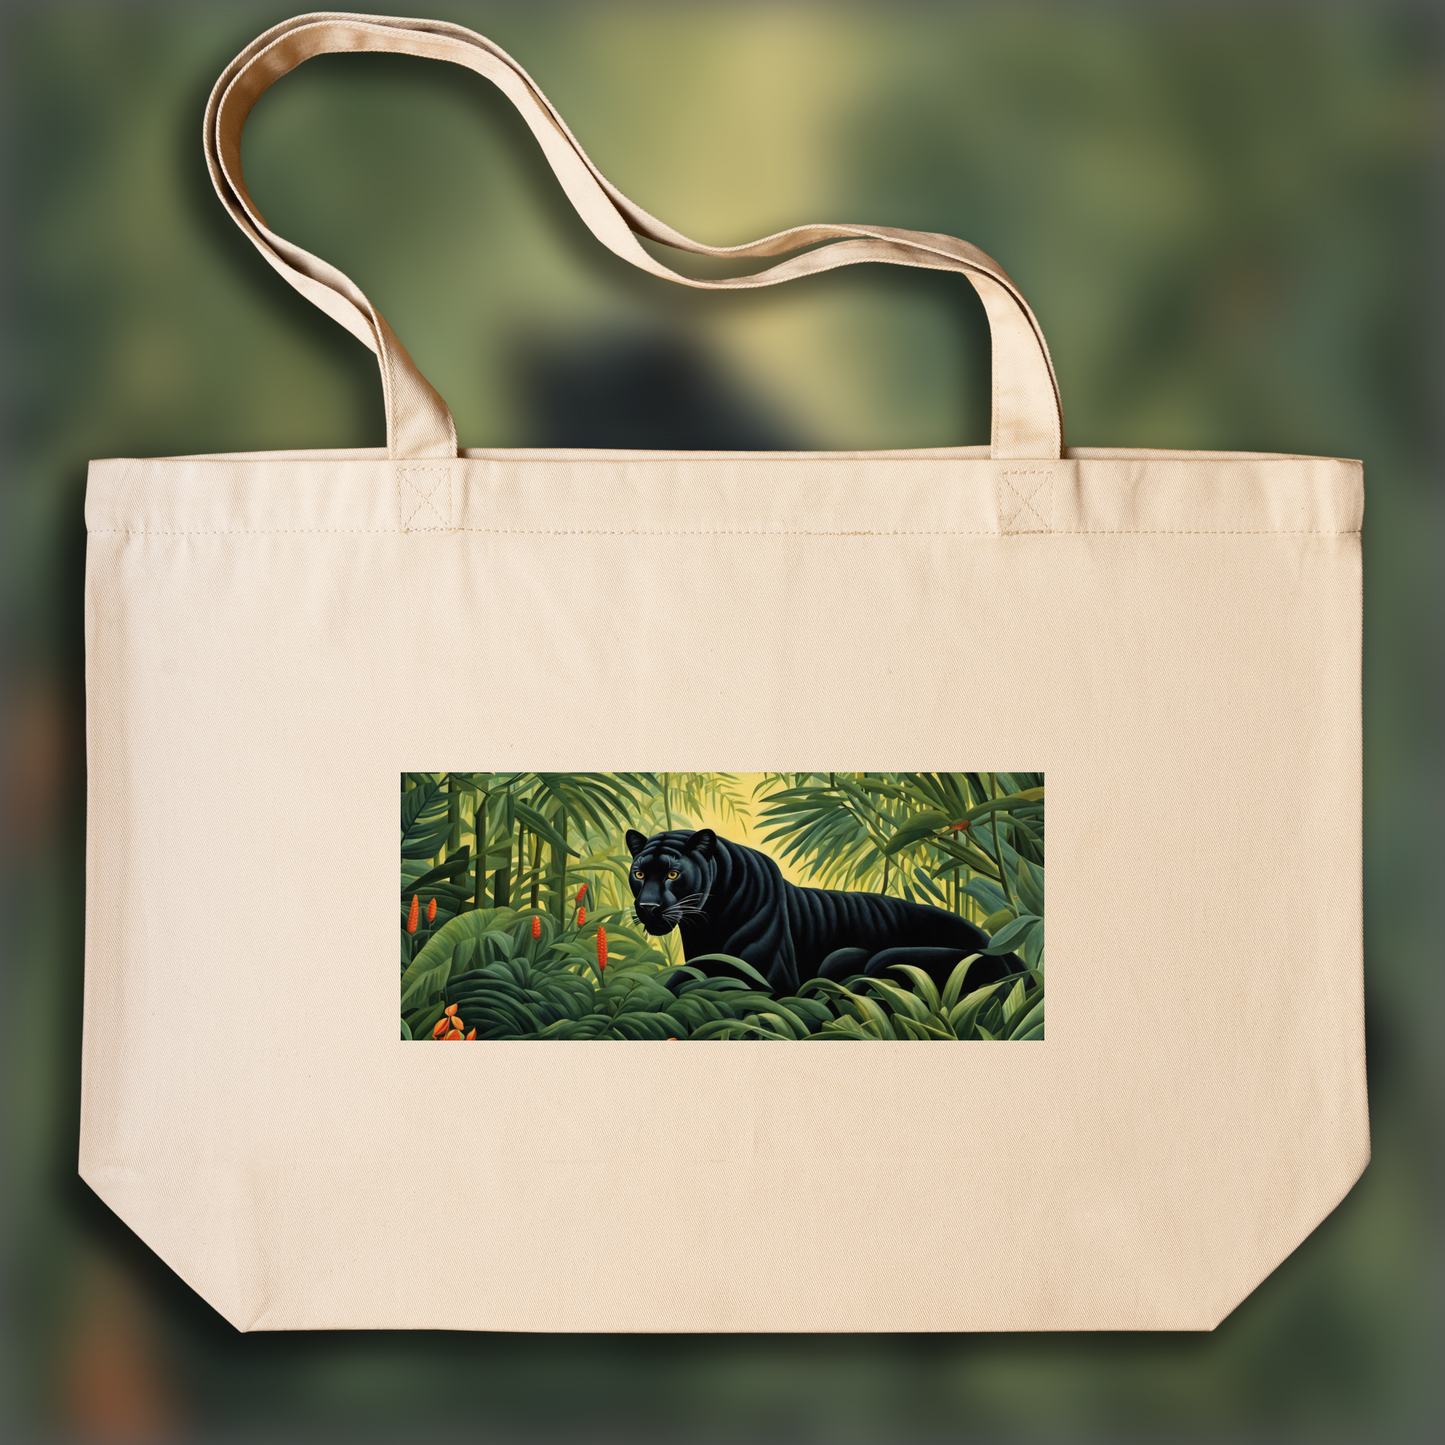 Tote bag large - Henri Rousseau, close-up of a black panther animal in the jungle - 1395439332